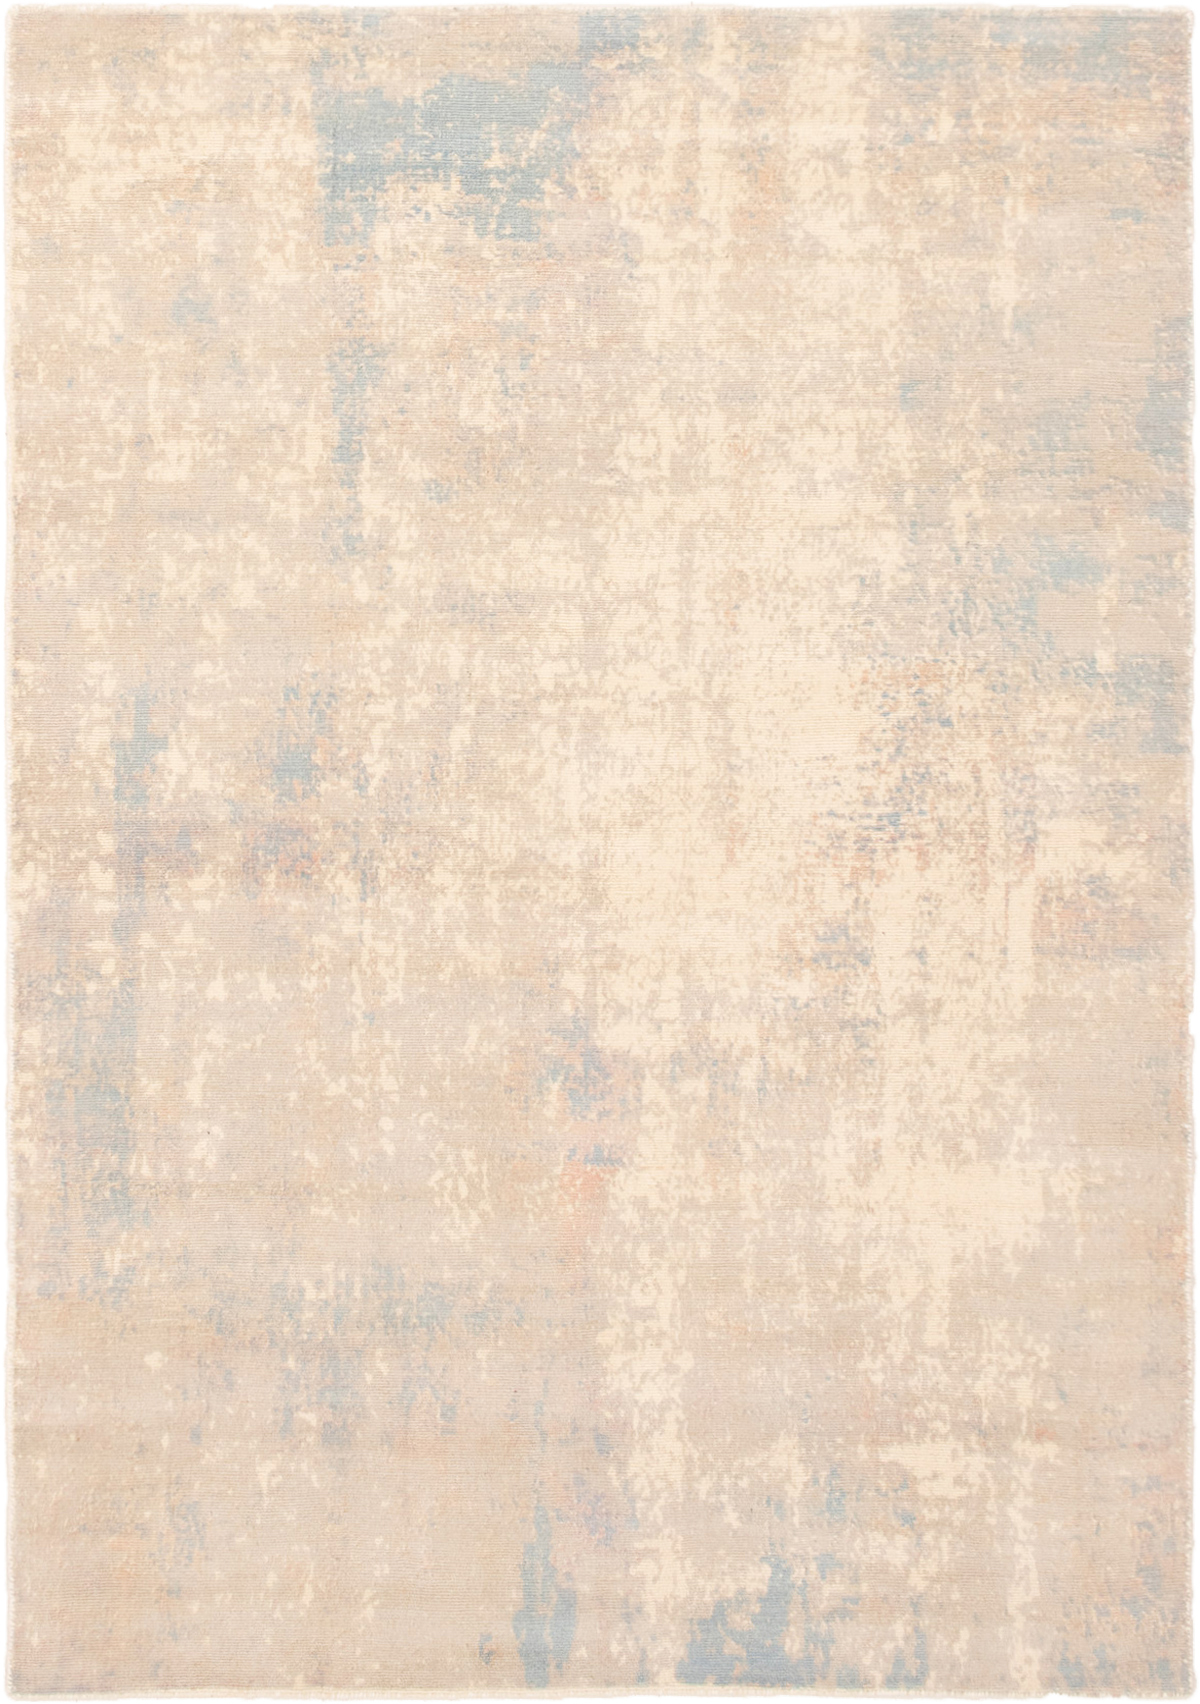 Hand-knotted Galleria Cream, Grey Wool Rug 5'1" x 7'4" Size: 5'1" x 7'4"  